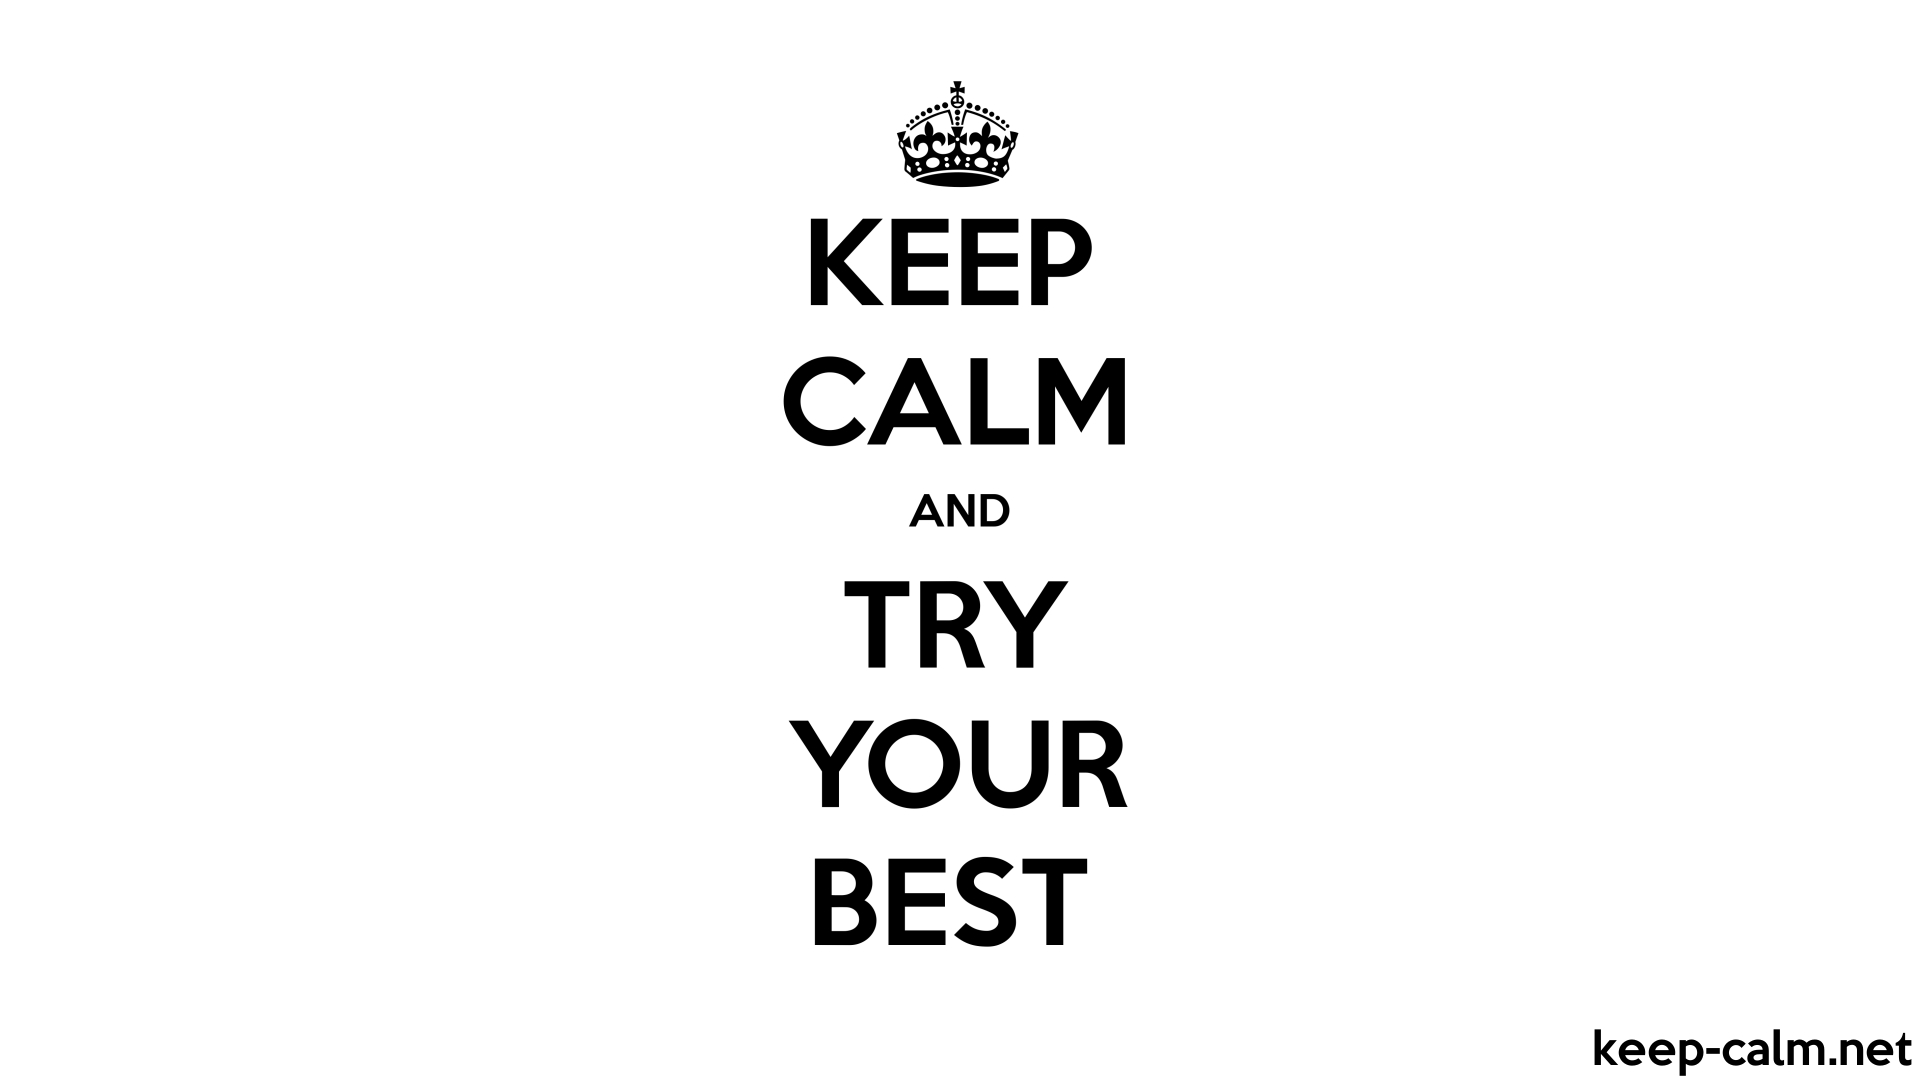 KEEP CALM AND TRY YOUR BEST